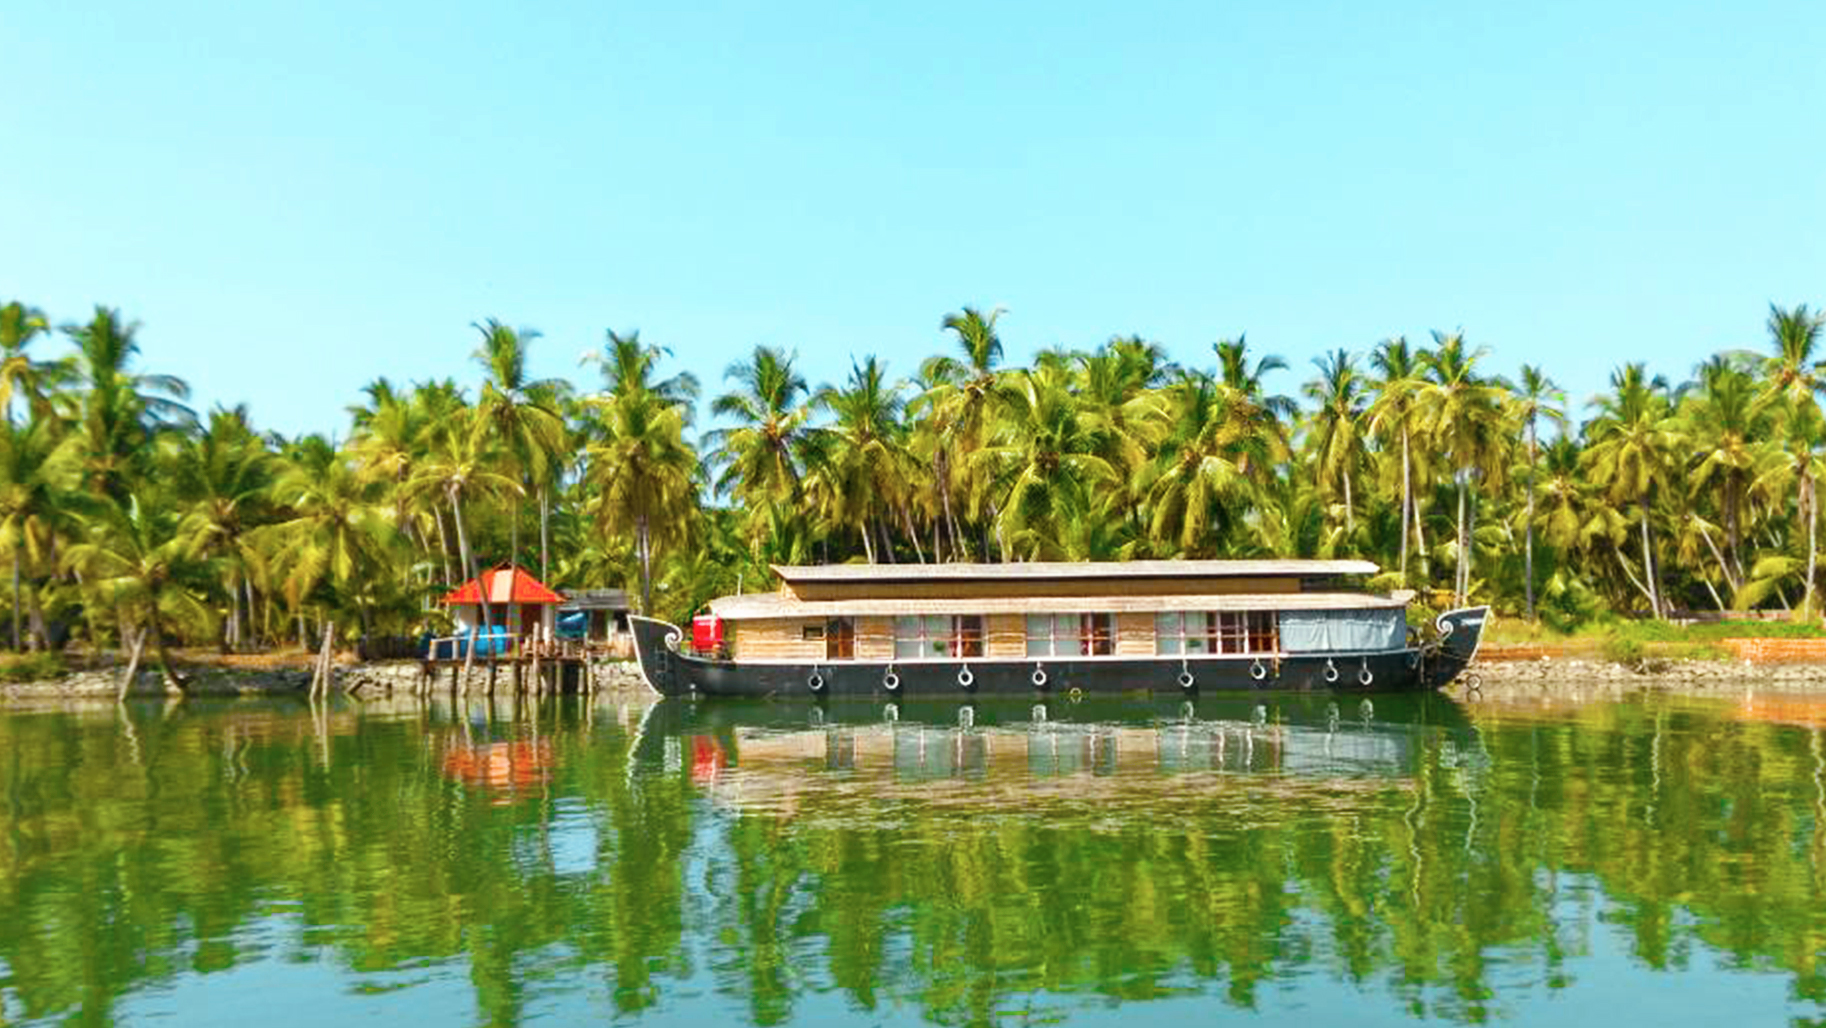 tourist places in calicut and malappuram